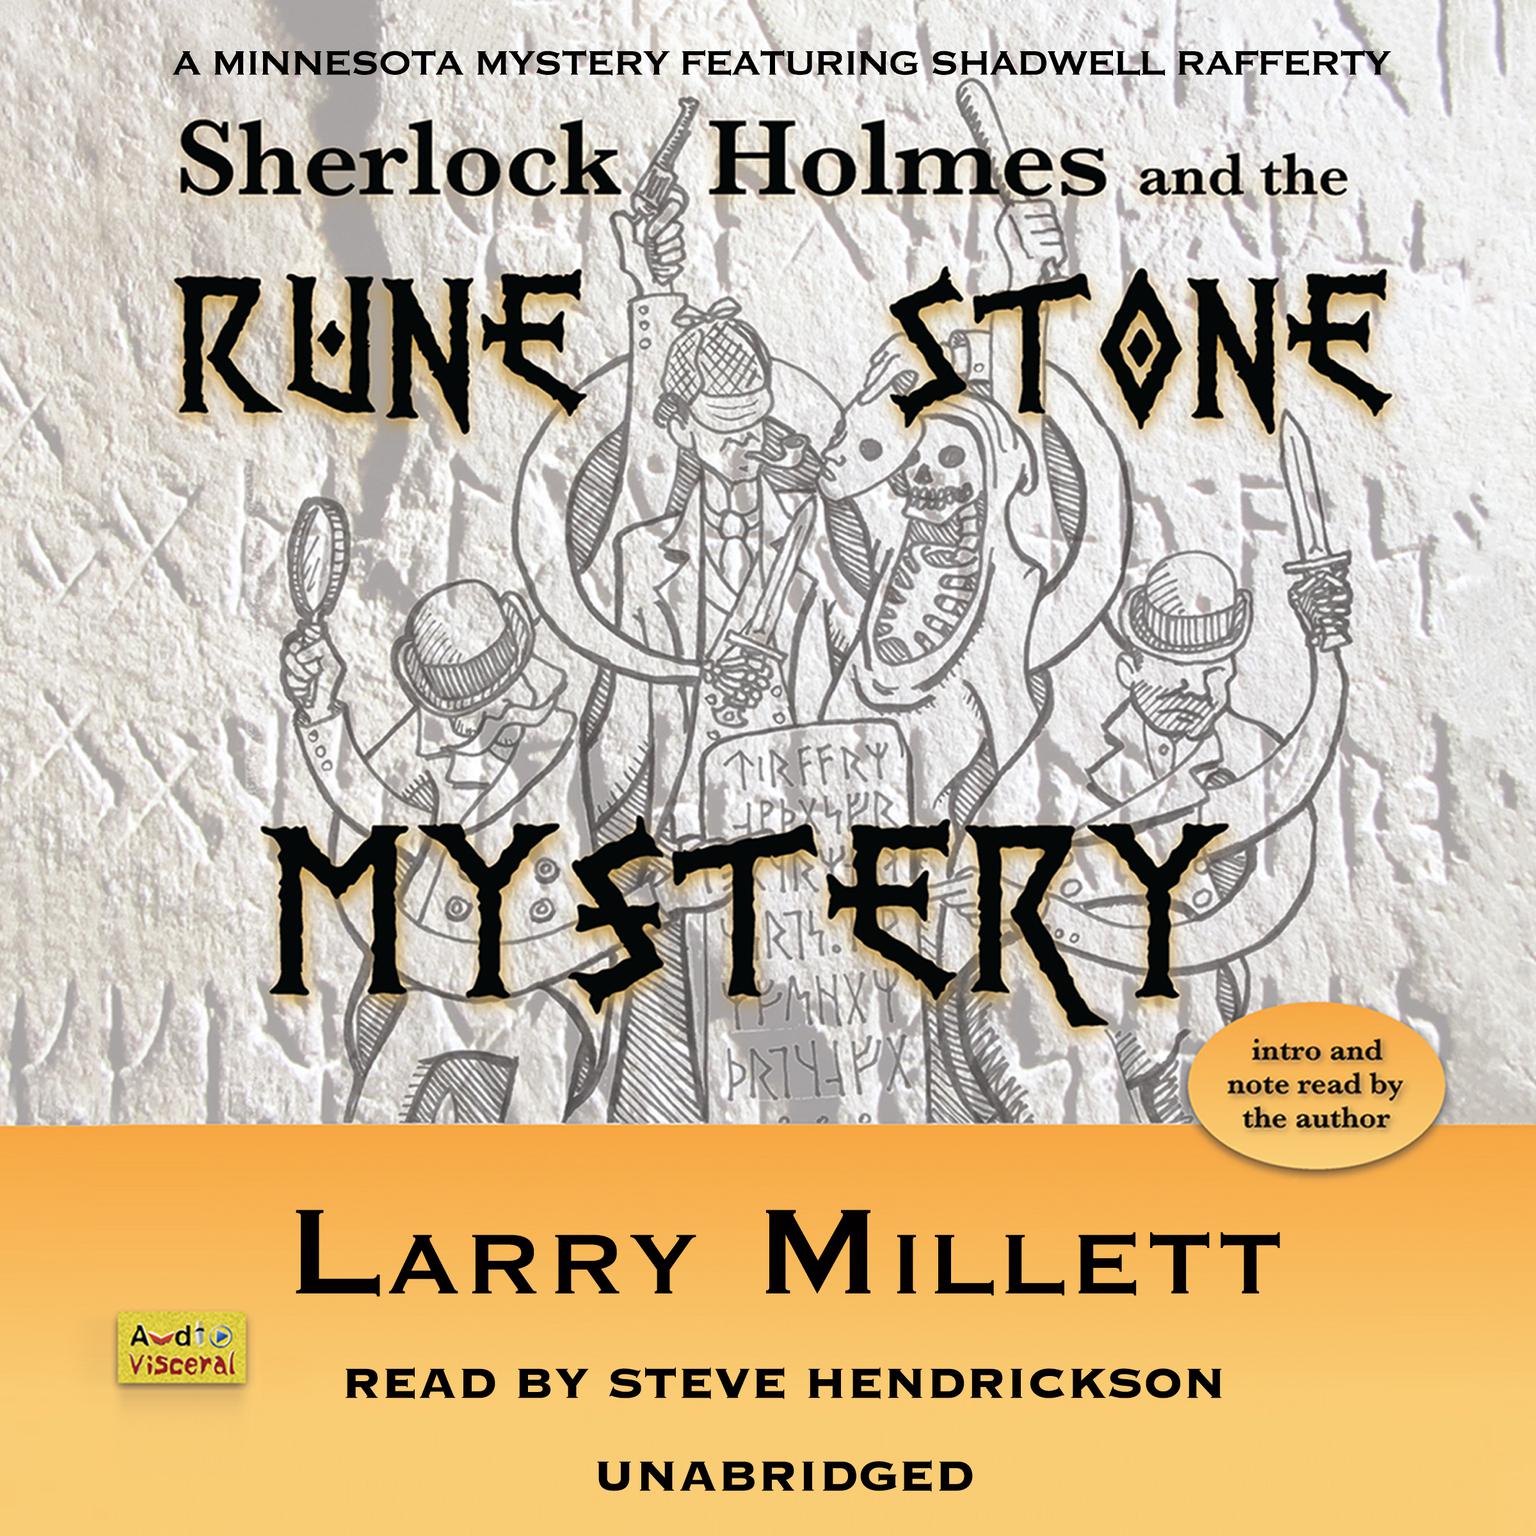 Sherlock Holmes and the Rune Stone Mystery: A Minnesota Mystery Featuring Shadwell Rafferty Audiobook, by Larry Millett